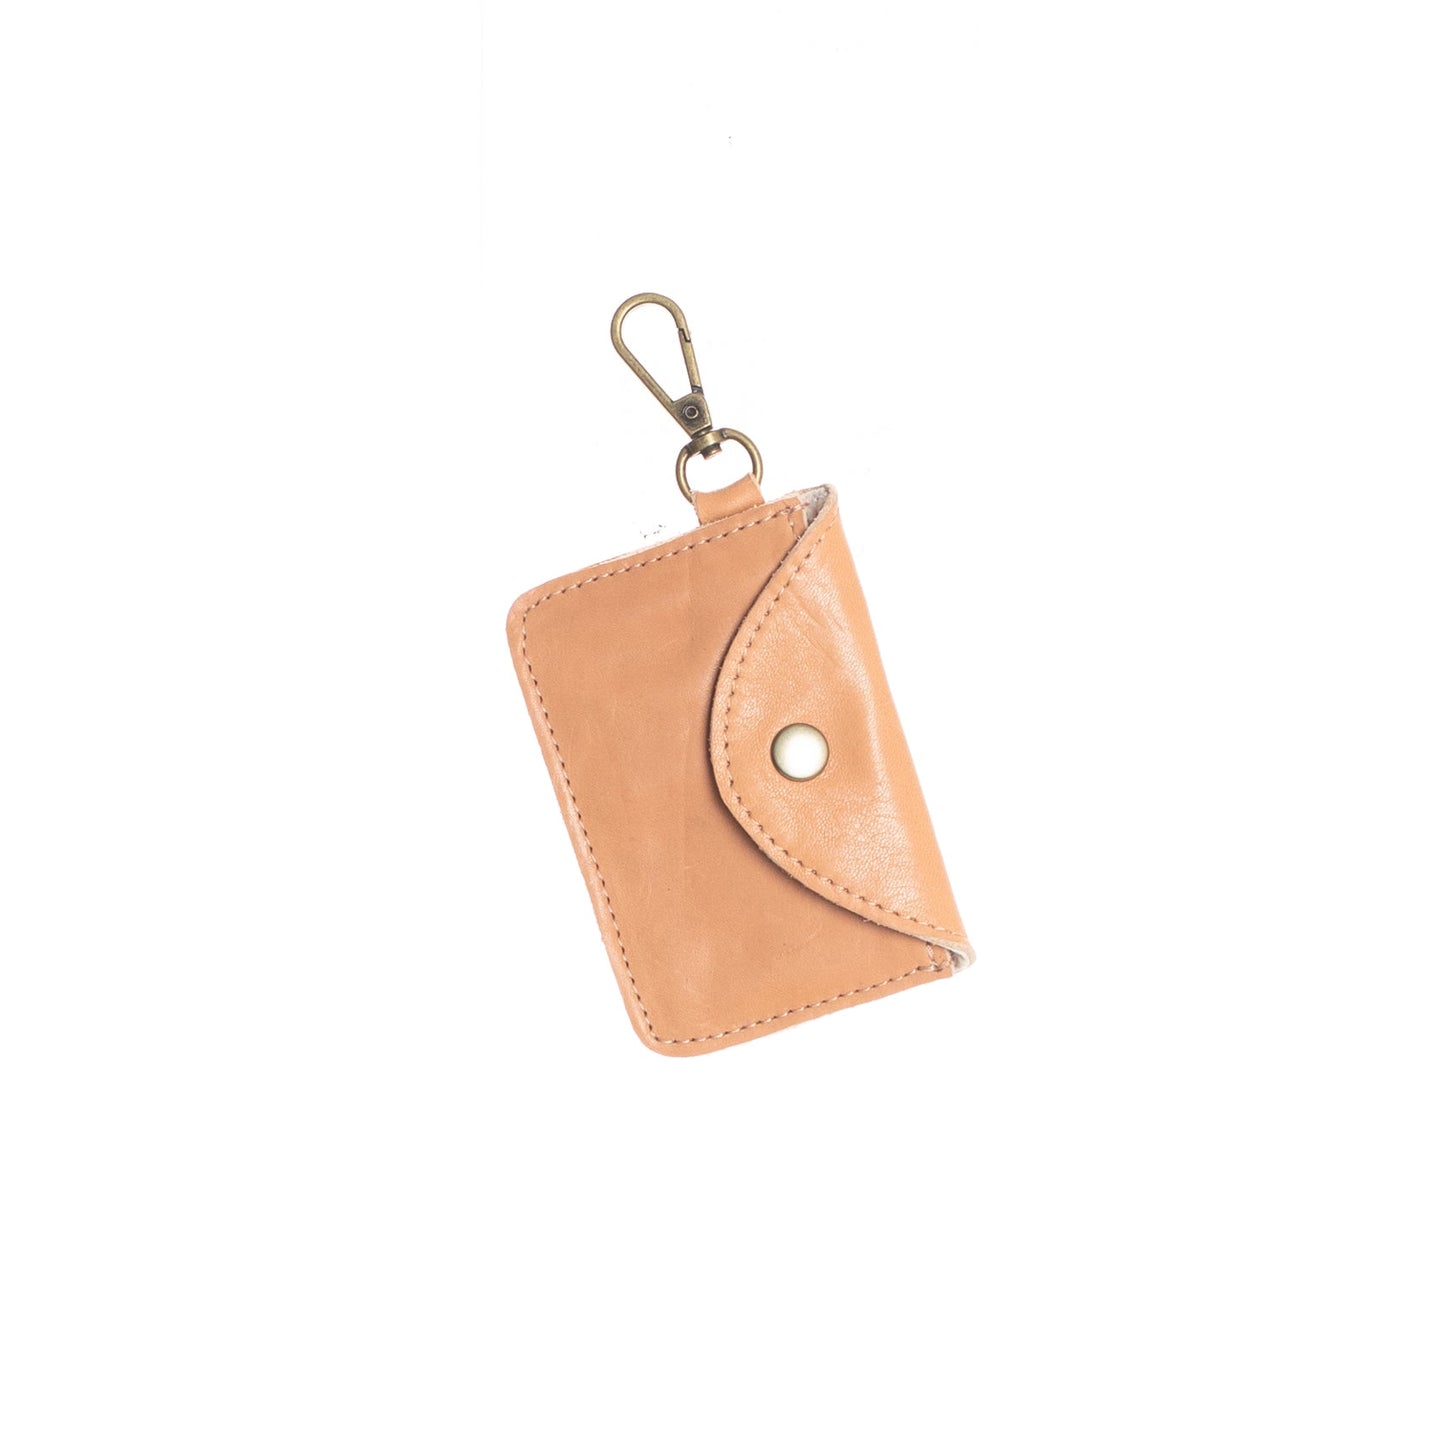 CARD CASE WITH CLASP - FULL LEATHER COLLECTION - SANDSTONE